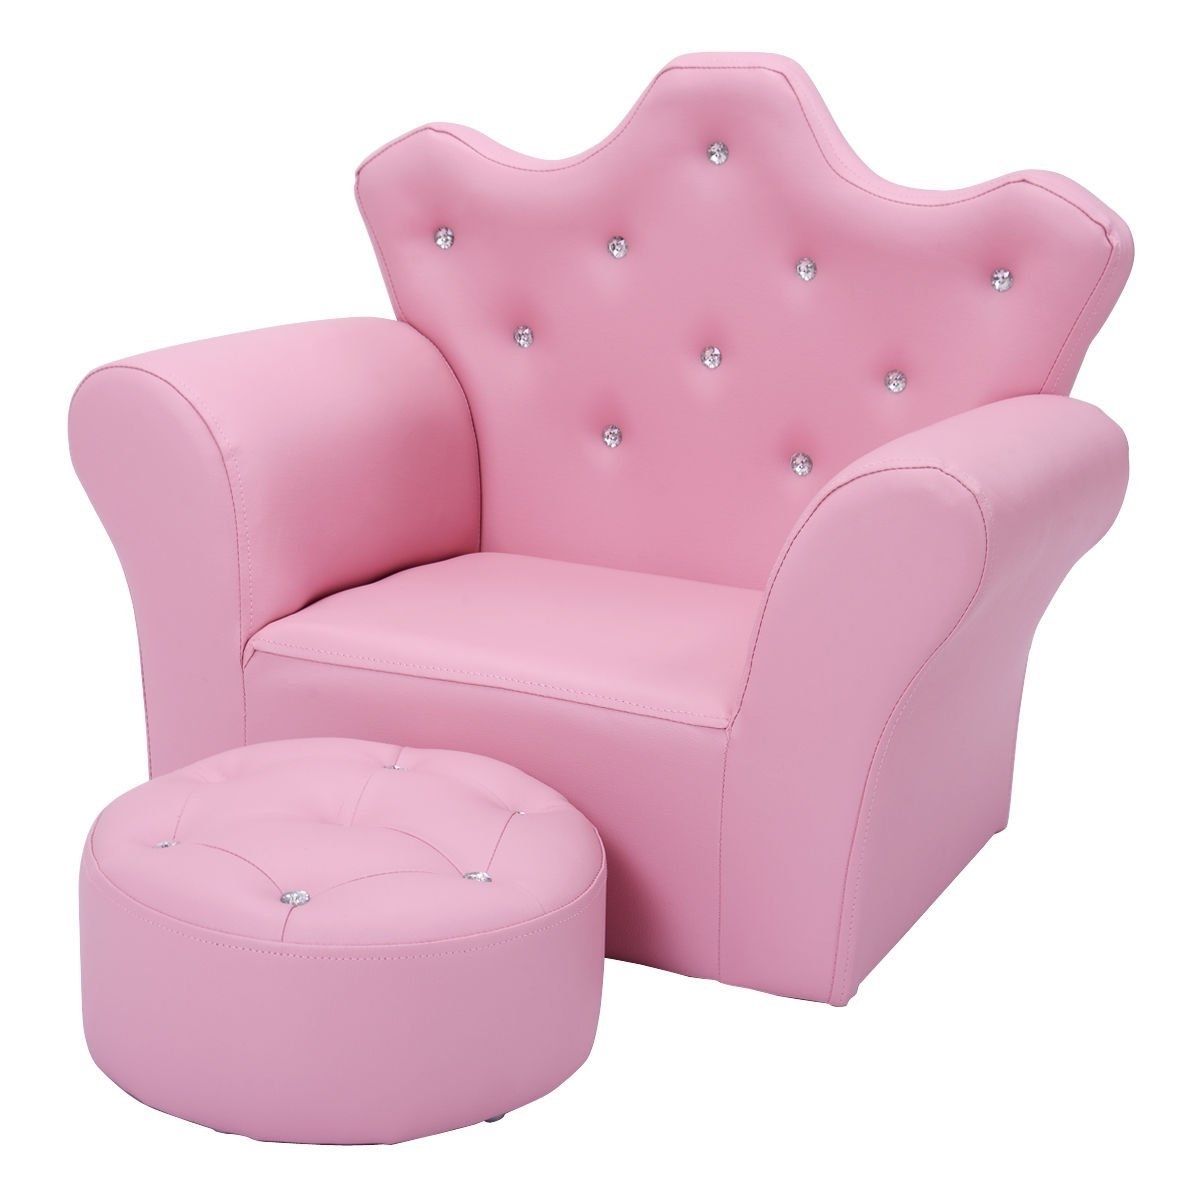 2017 Amazon: Costzon Kids Sofa Chair With Ottoman Children Intended For Personalized Kids Chairs And Sofas (Photo 4 of 15)